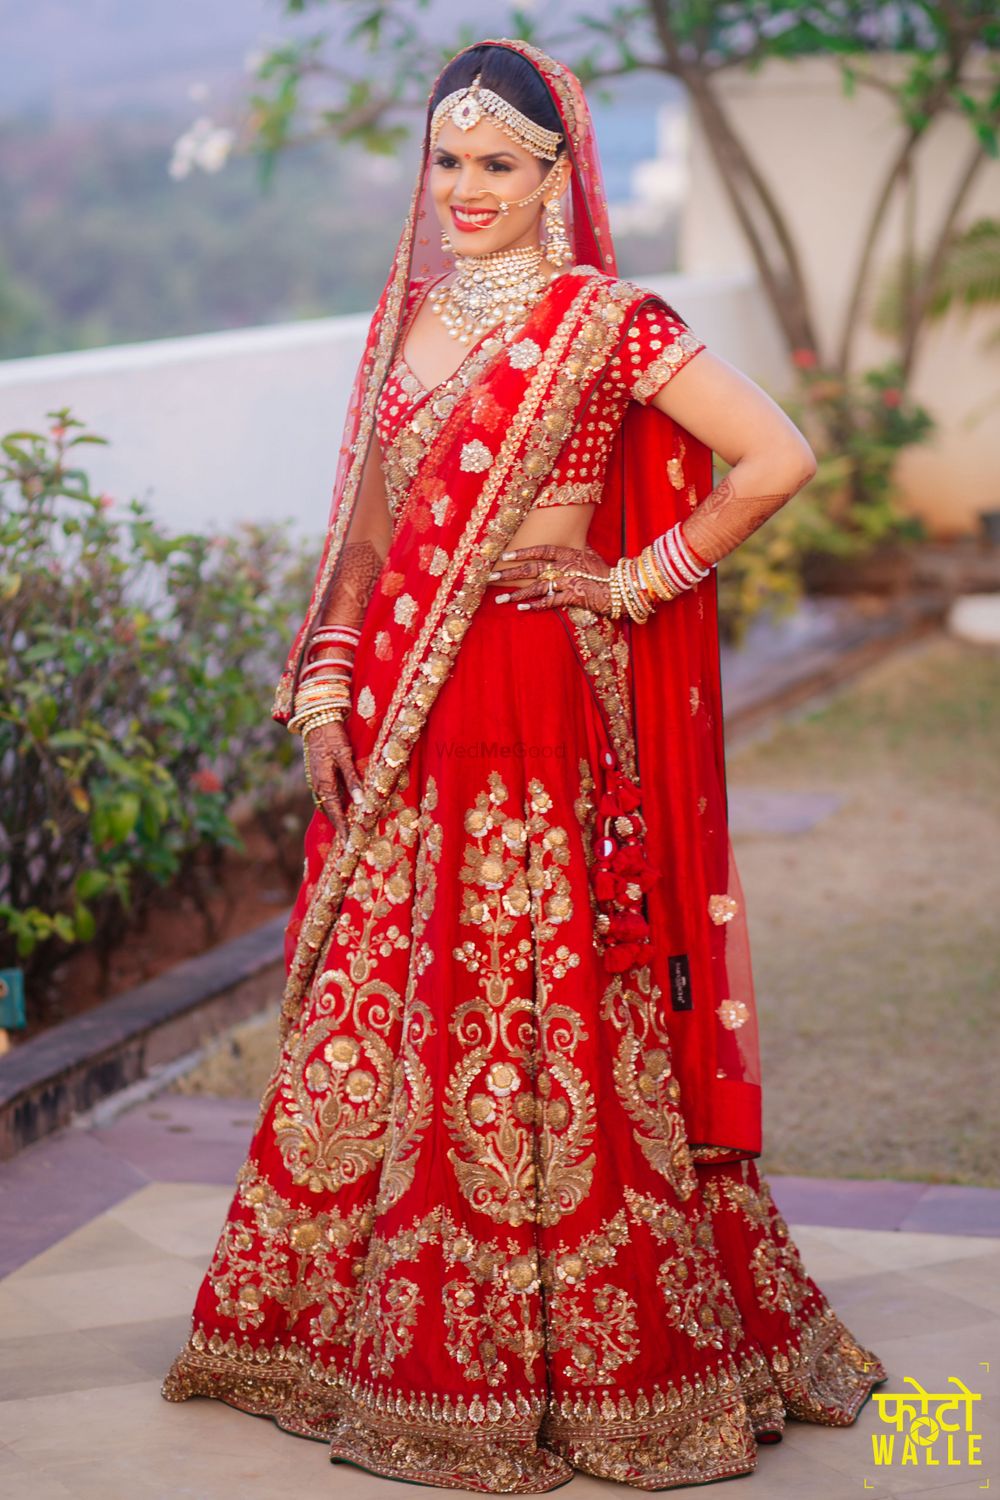 Photo of Red Bridal Lehenga with Gold Zari Embroidery